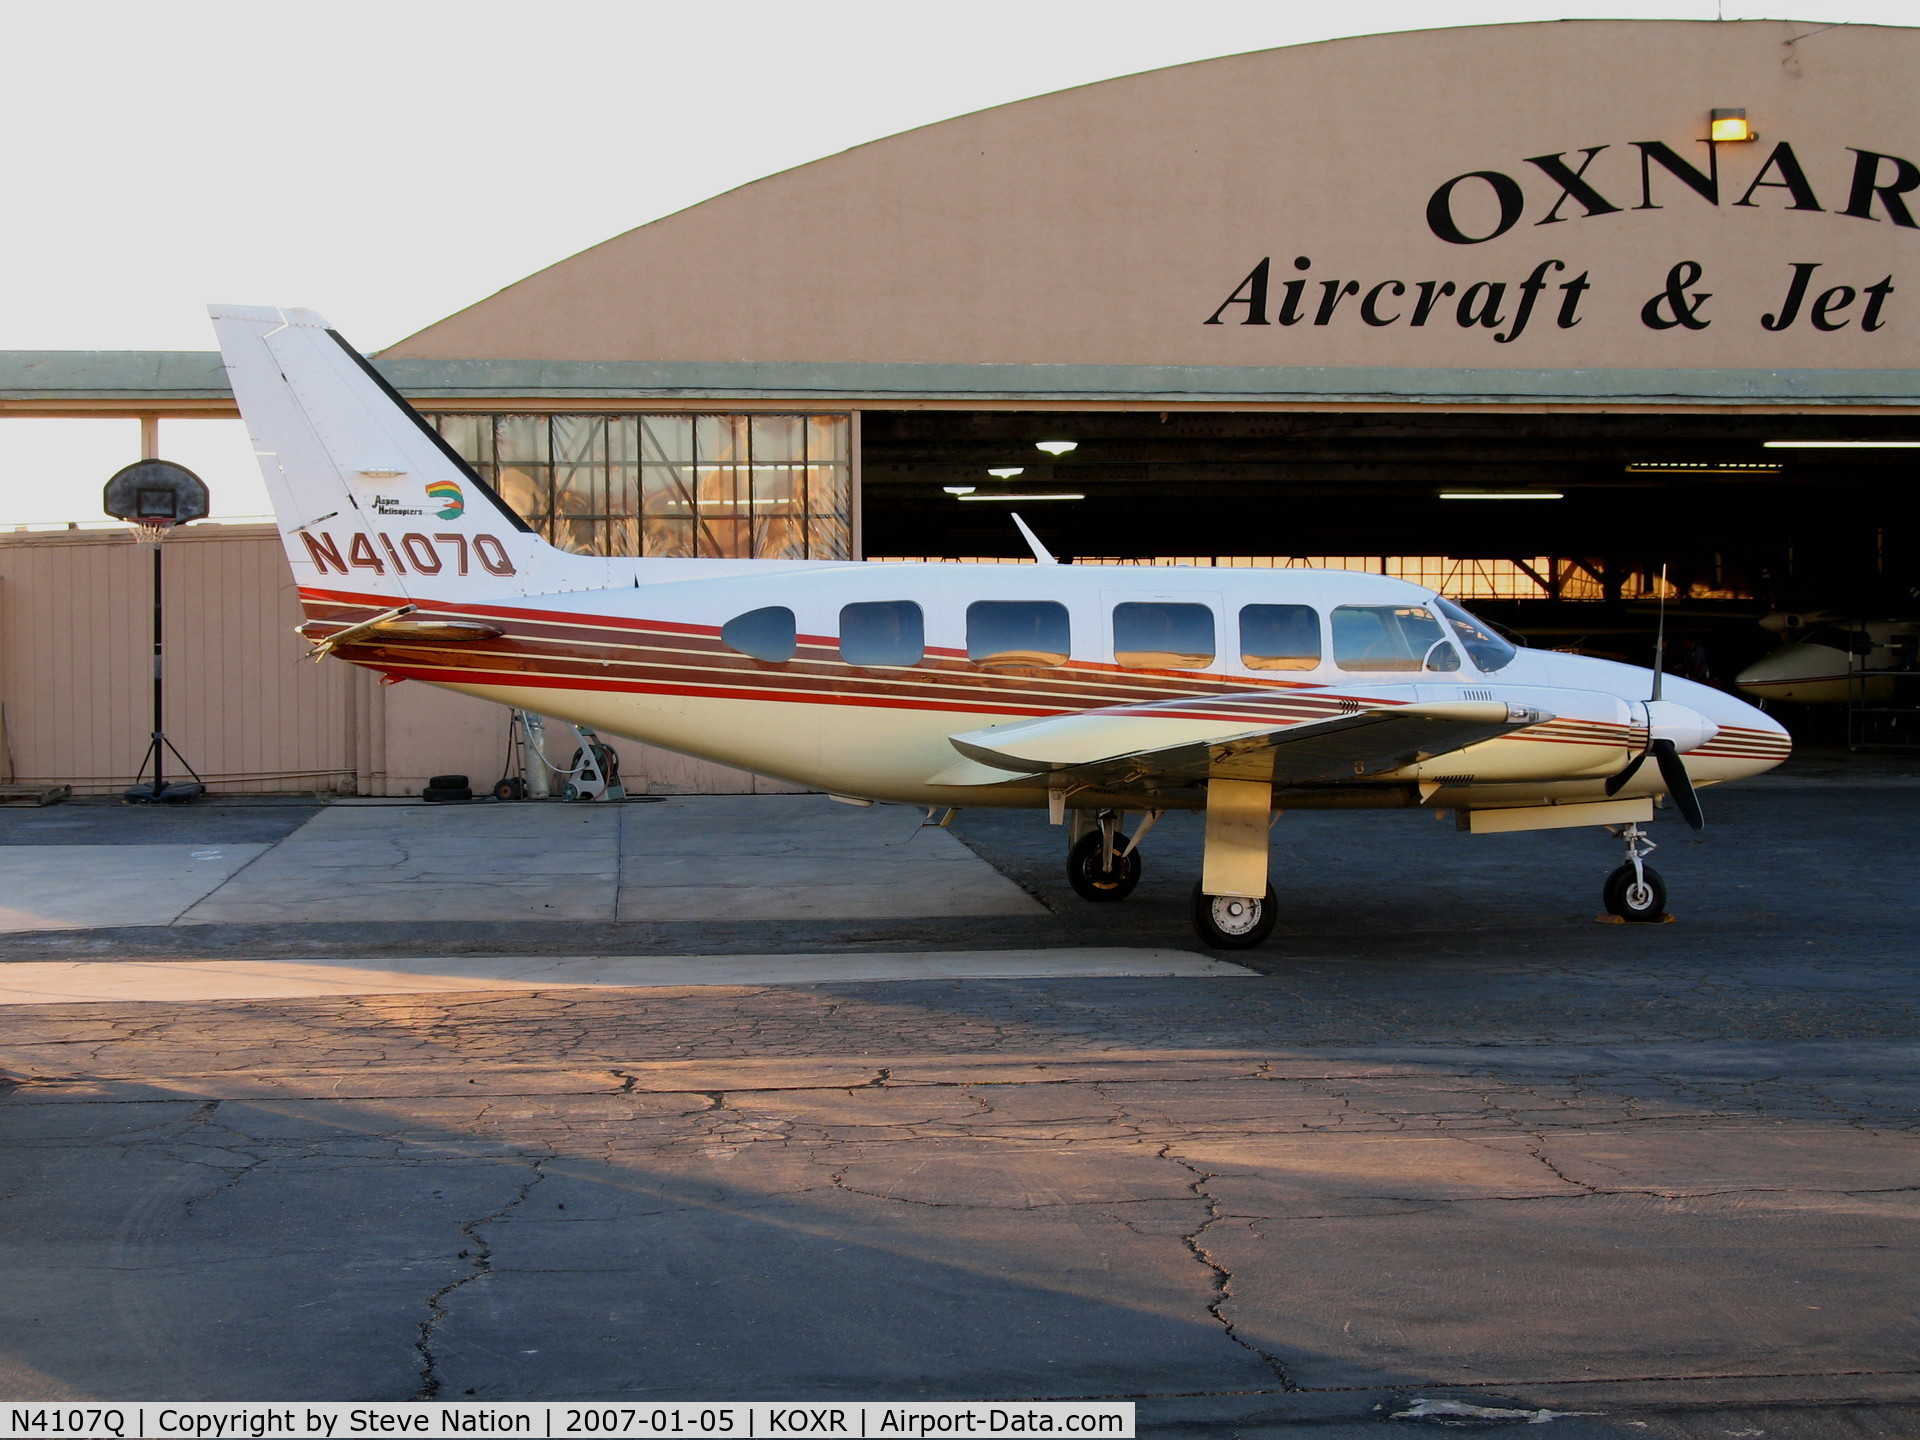 N4107Q, 1982 Piper PA-31-350 Chieftain C/N 31-8253008, Aspen Helicopters 1982 PA-31-350 @ Oxnard Airport, CA in low light